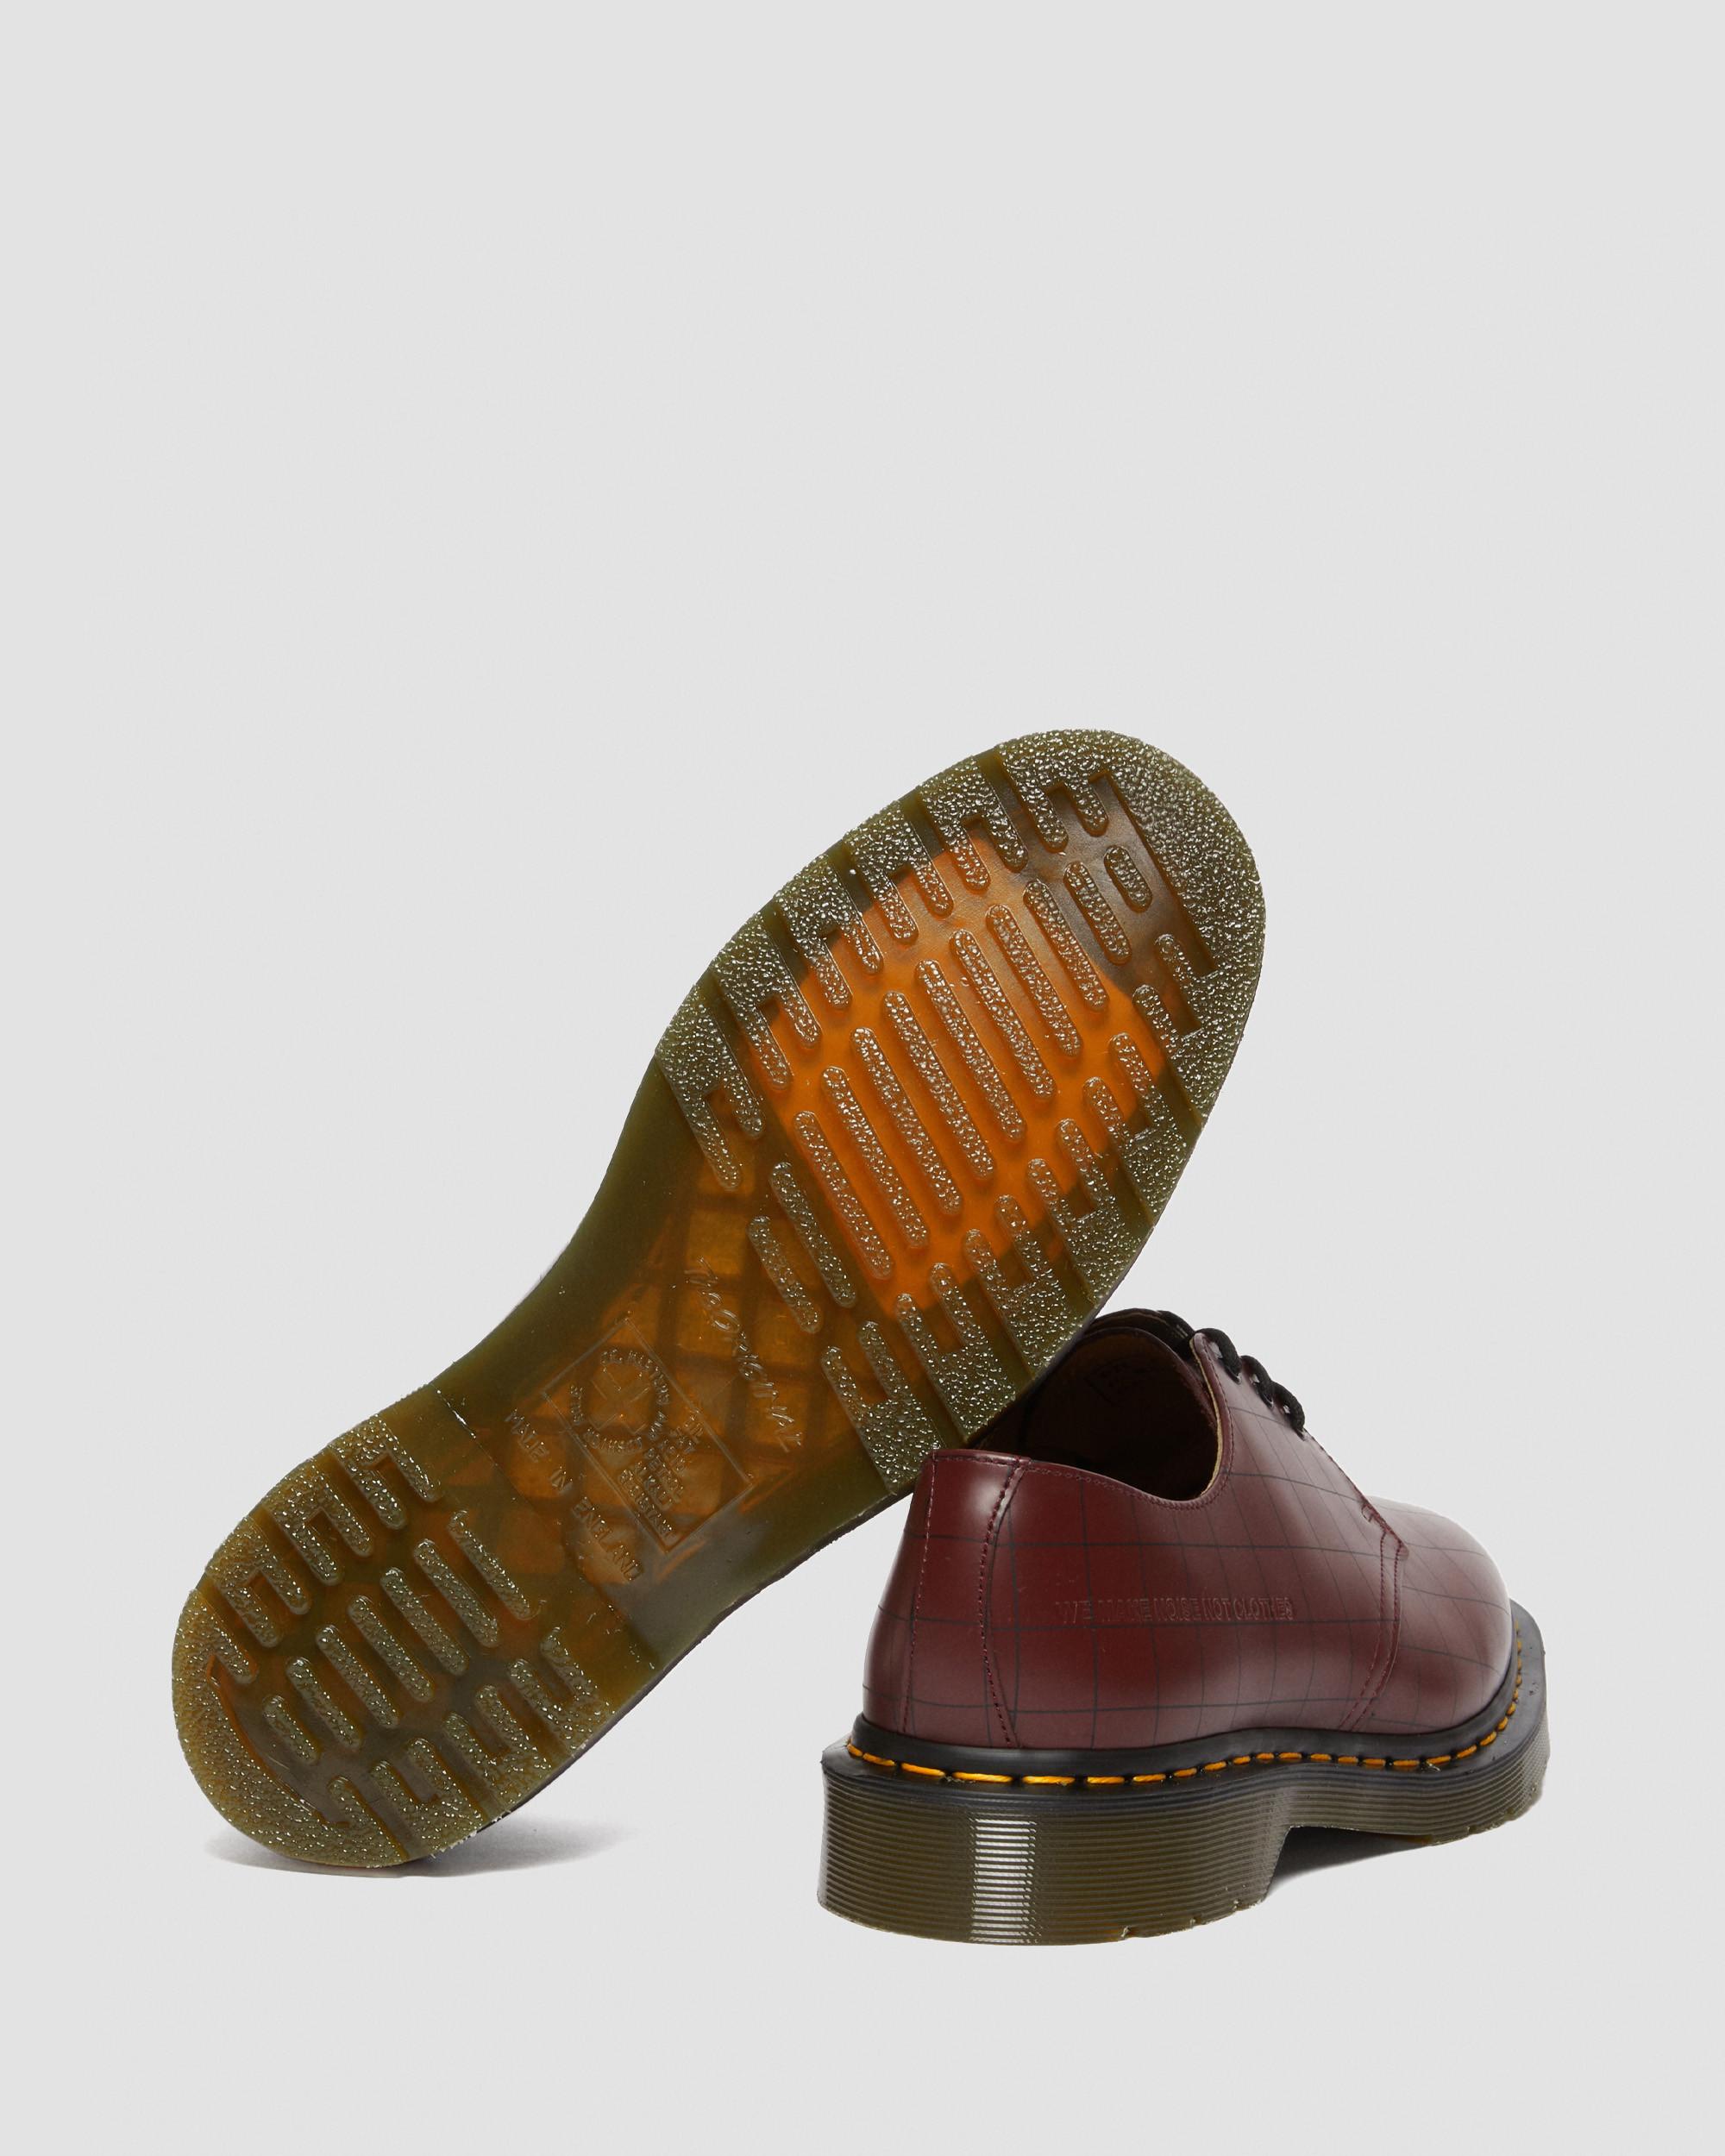 1461 Undercover Smooth Leather Shoes1461 Undercover Smooth Leather Shoes Dr. Martens